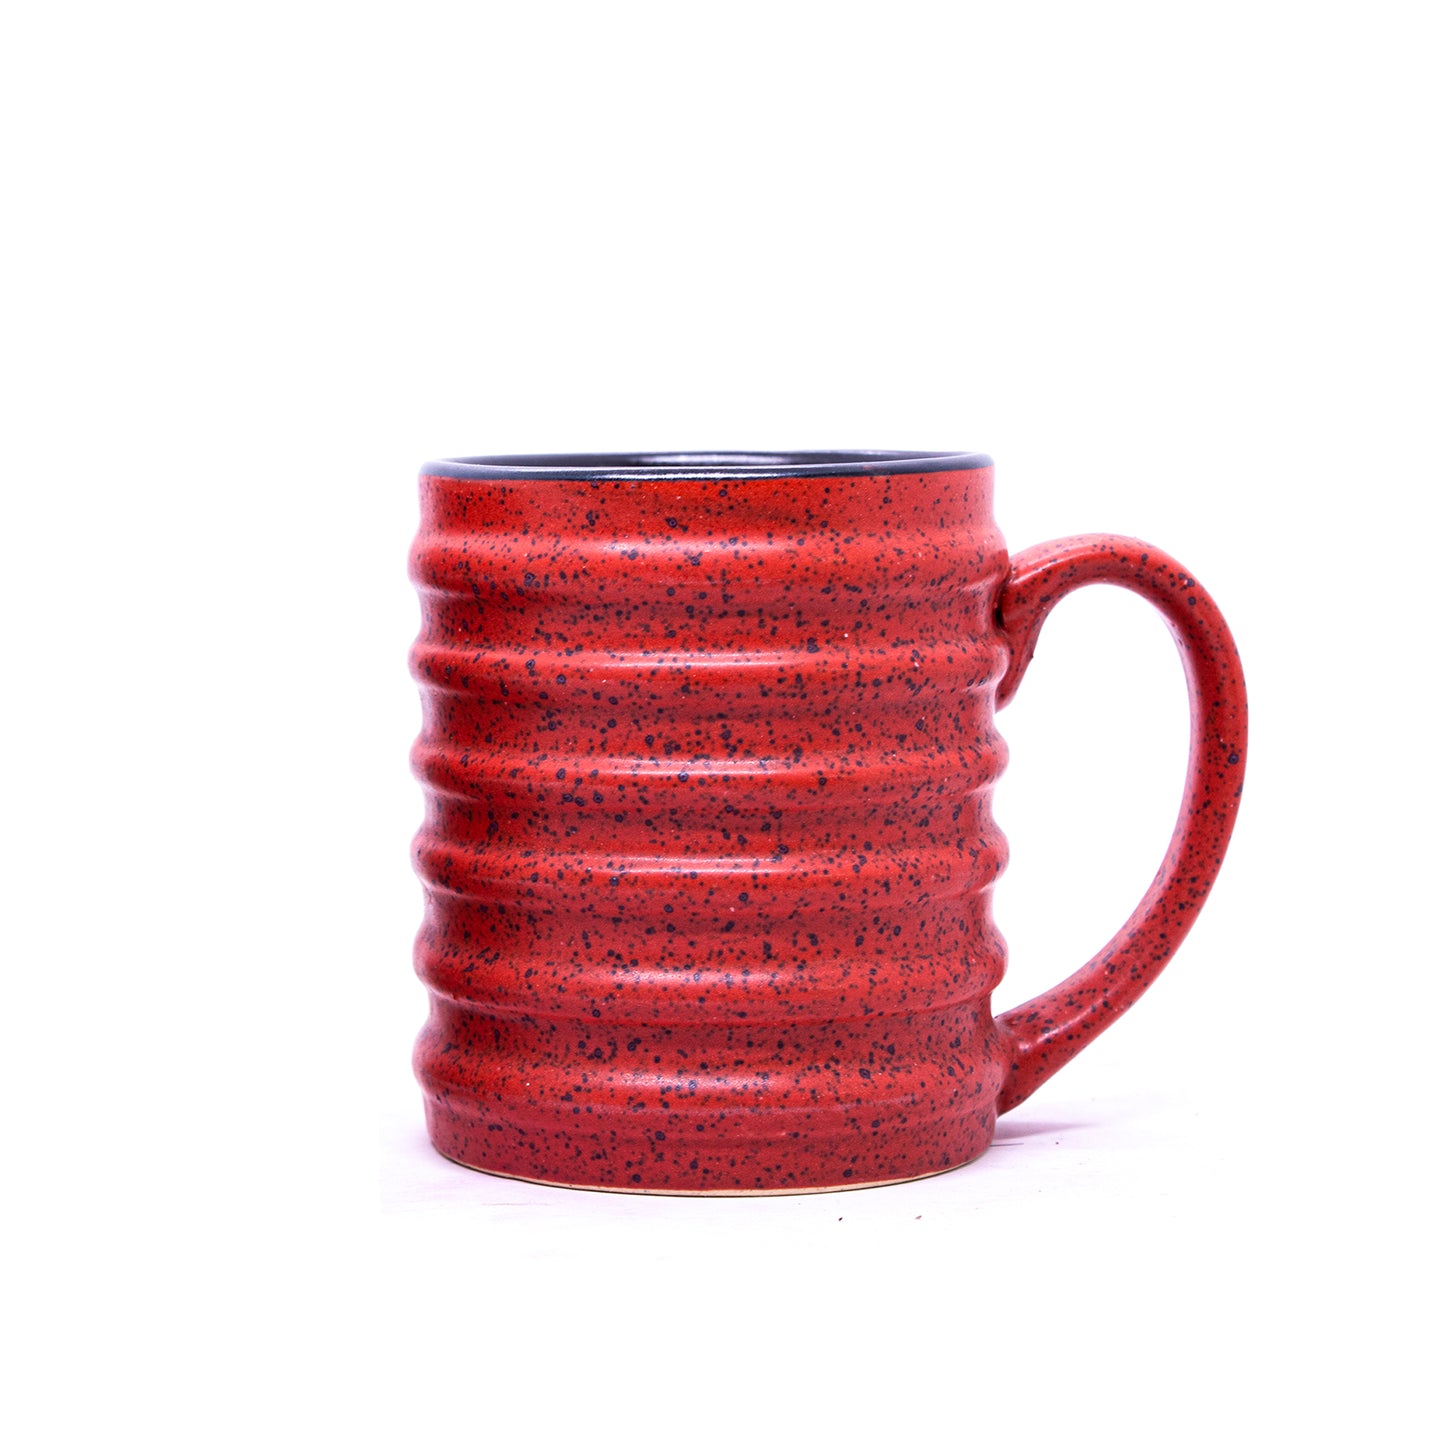 'Rings Aren't Restricted To Fingers' Ceramic Coffee Mug (Set of Two)